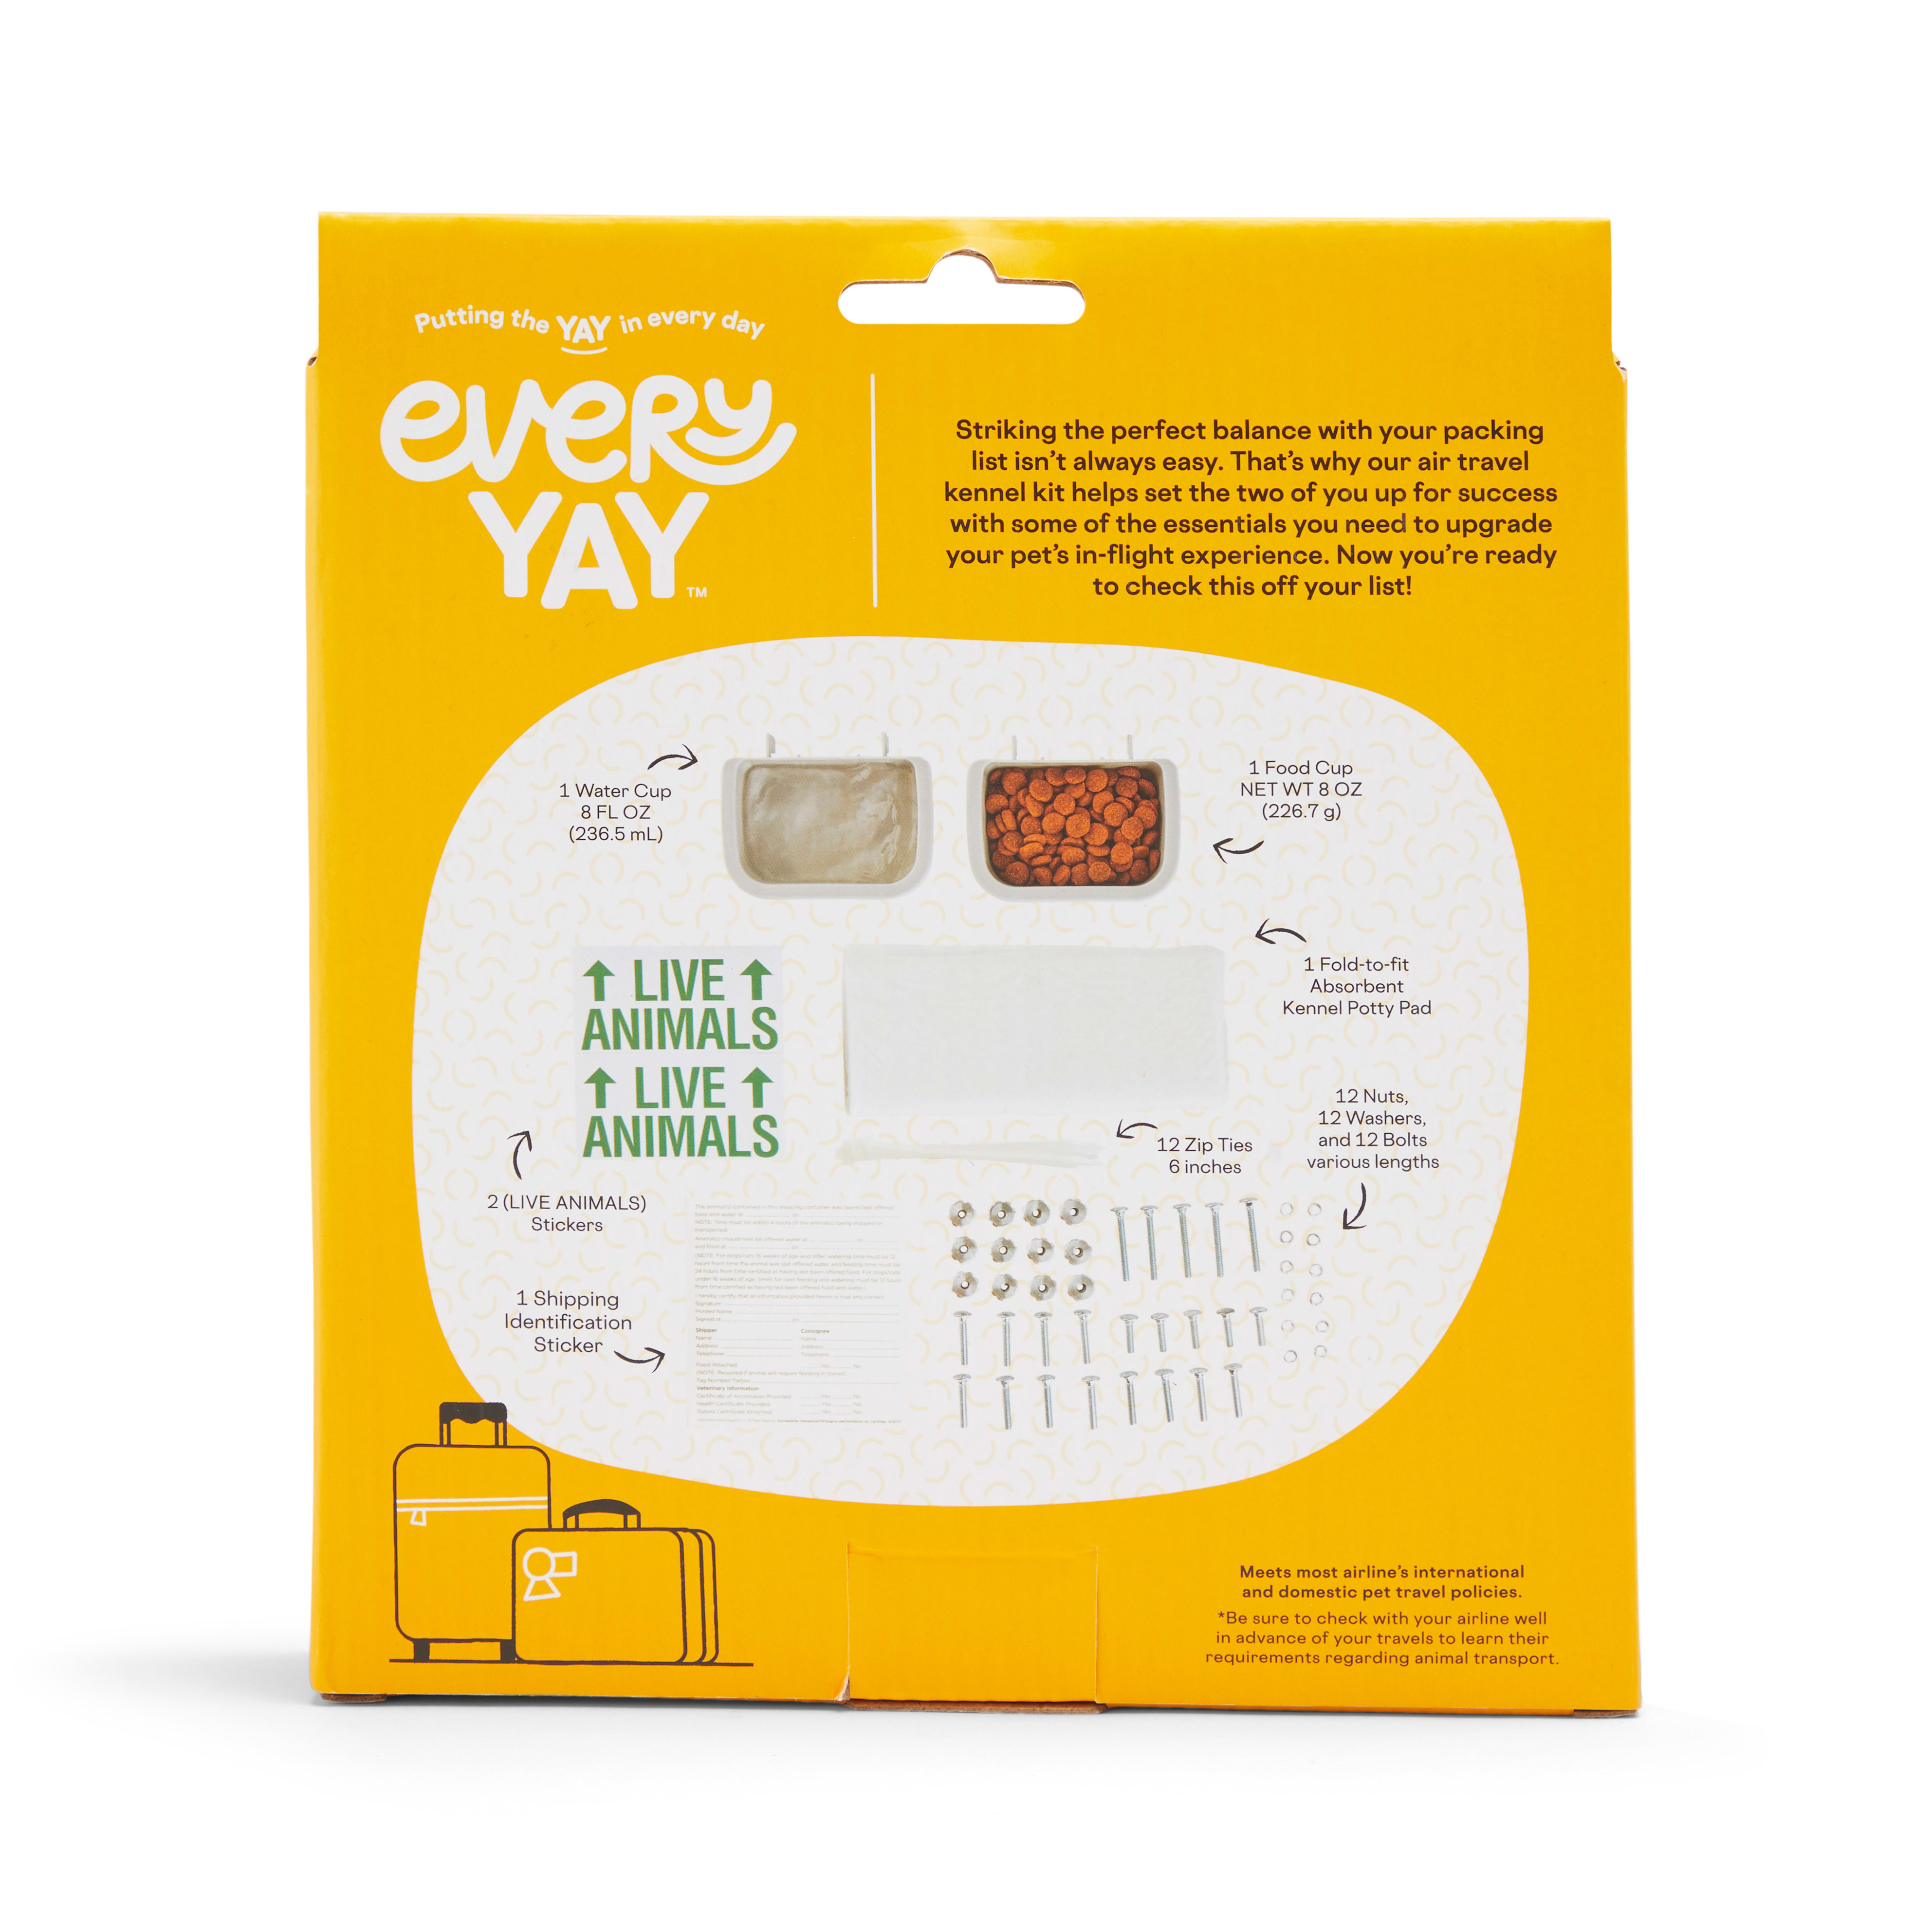 EveryYay Going Places Air Travel Dog Kennel Kit